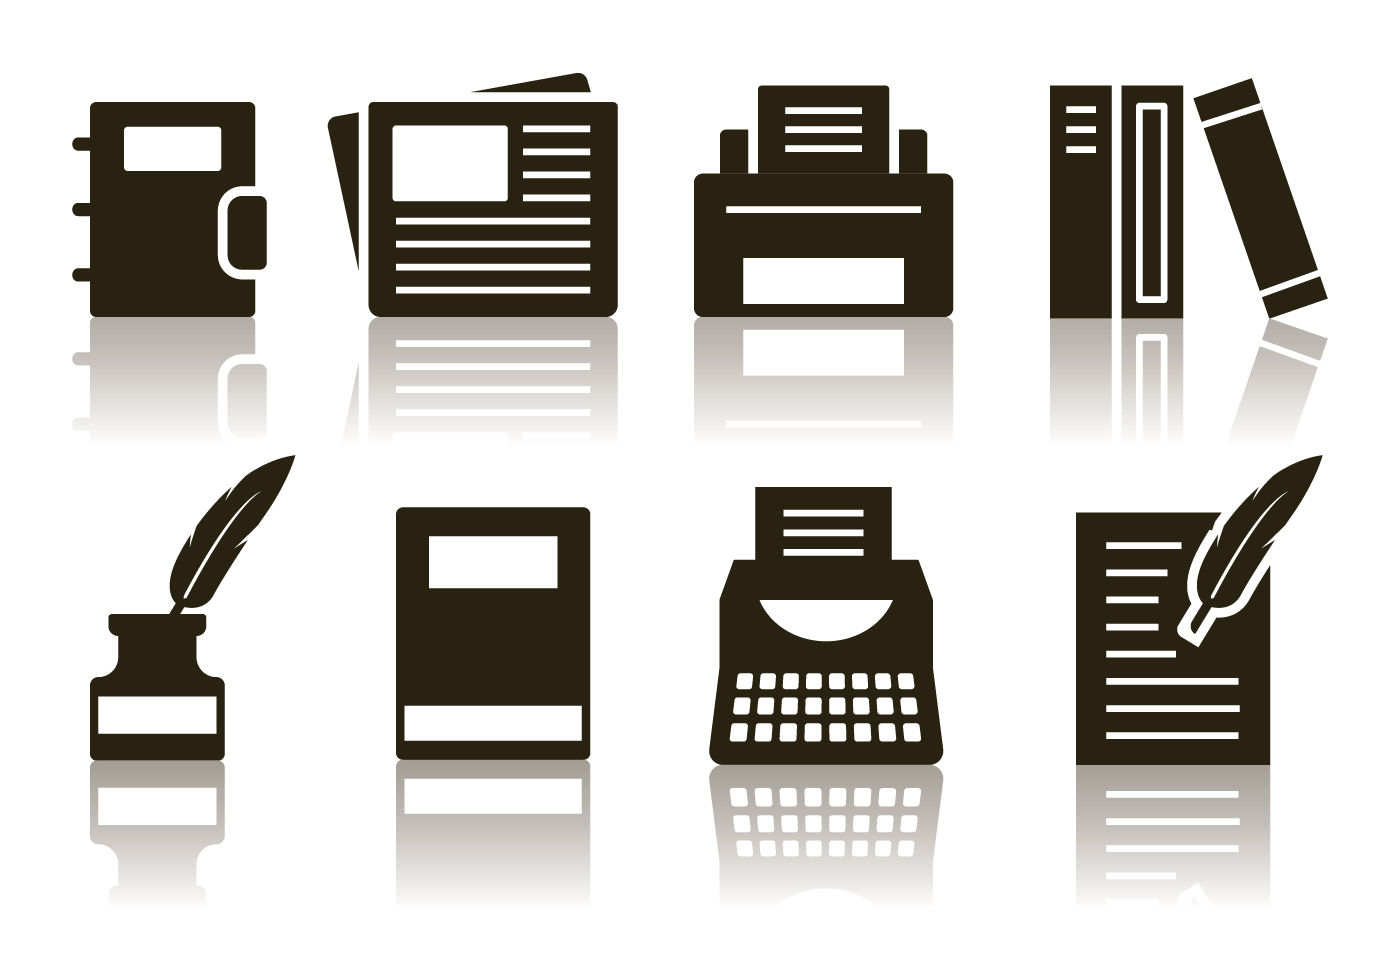 Book vector icon stock vector. Illustration of abstract - 45638222